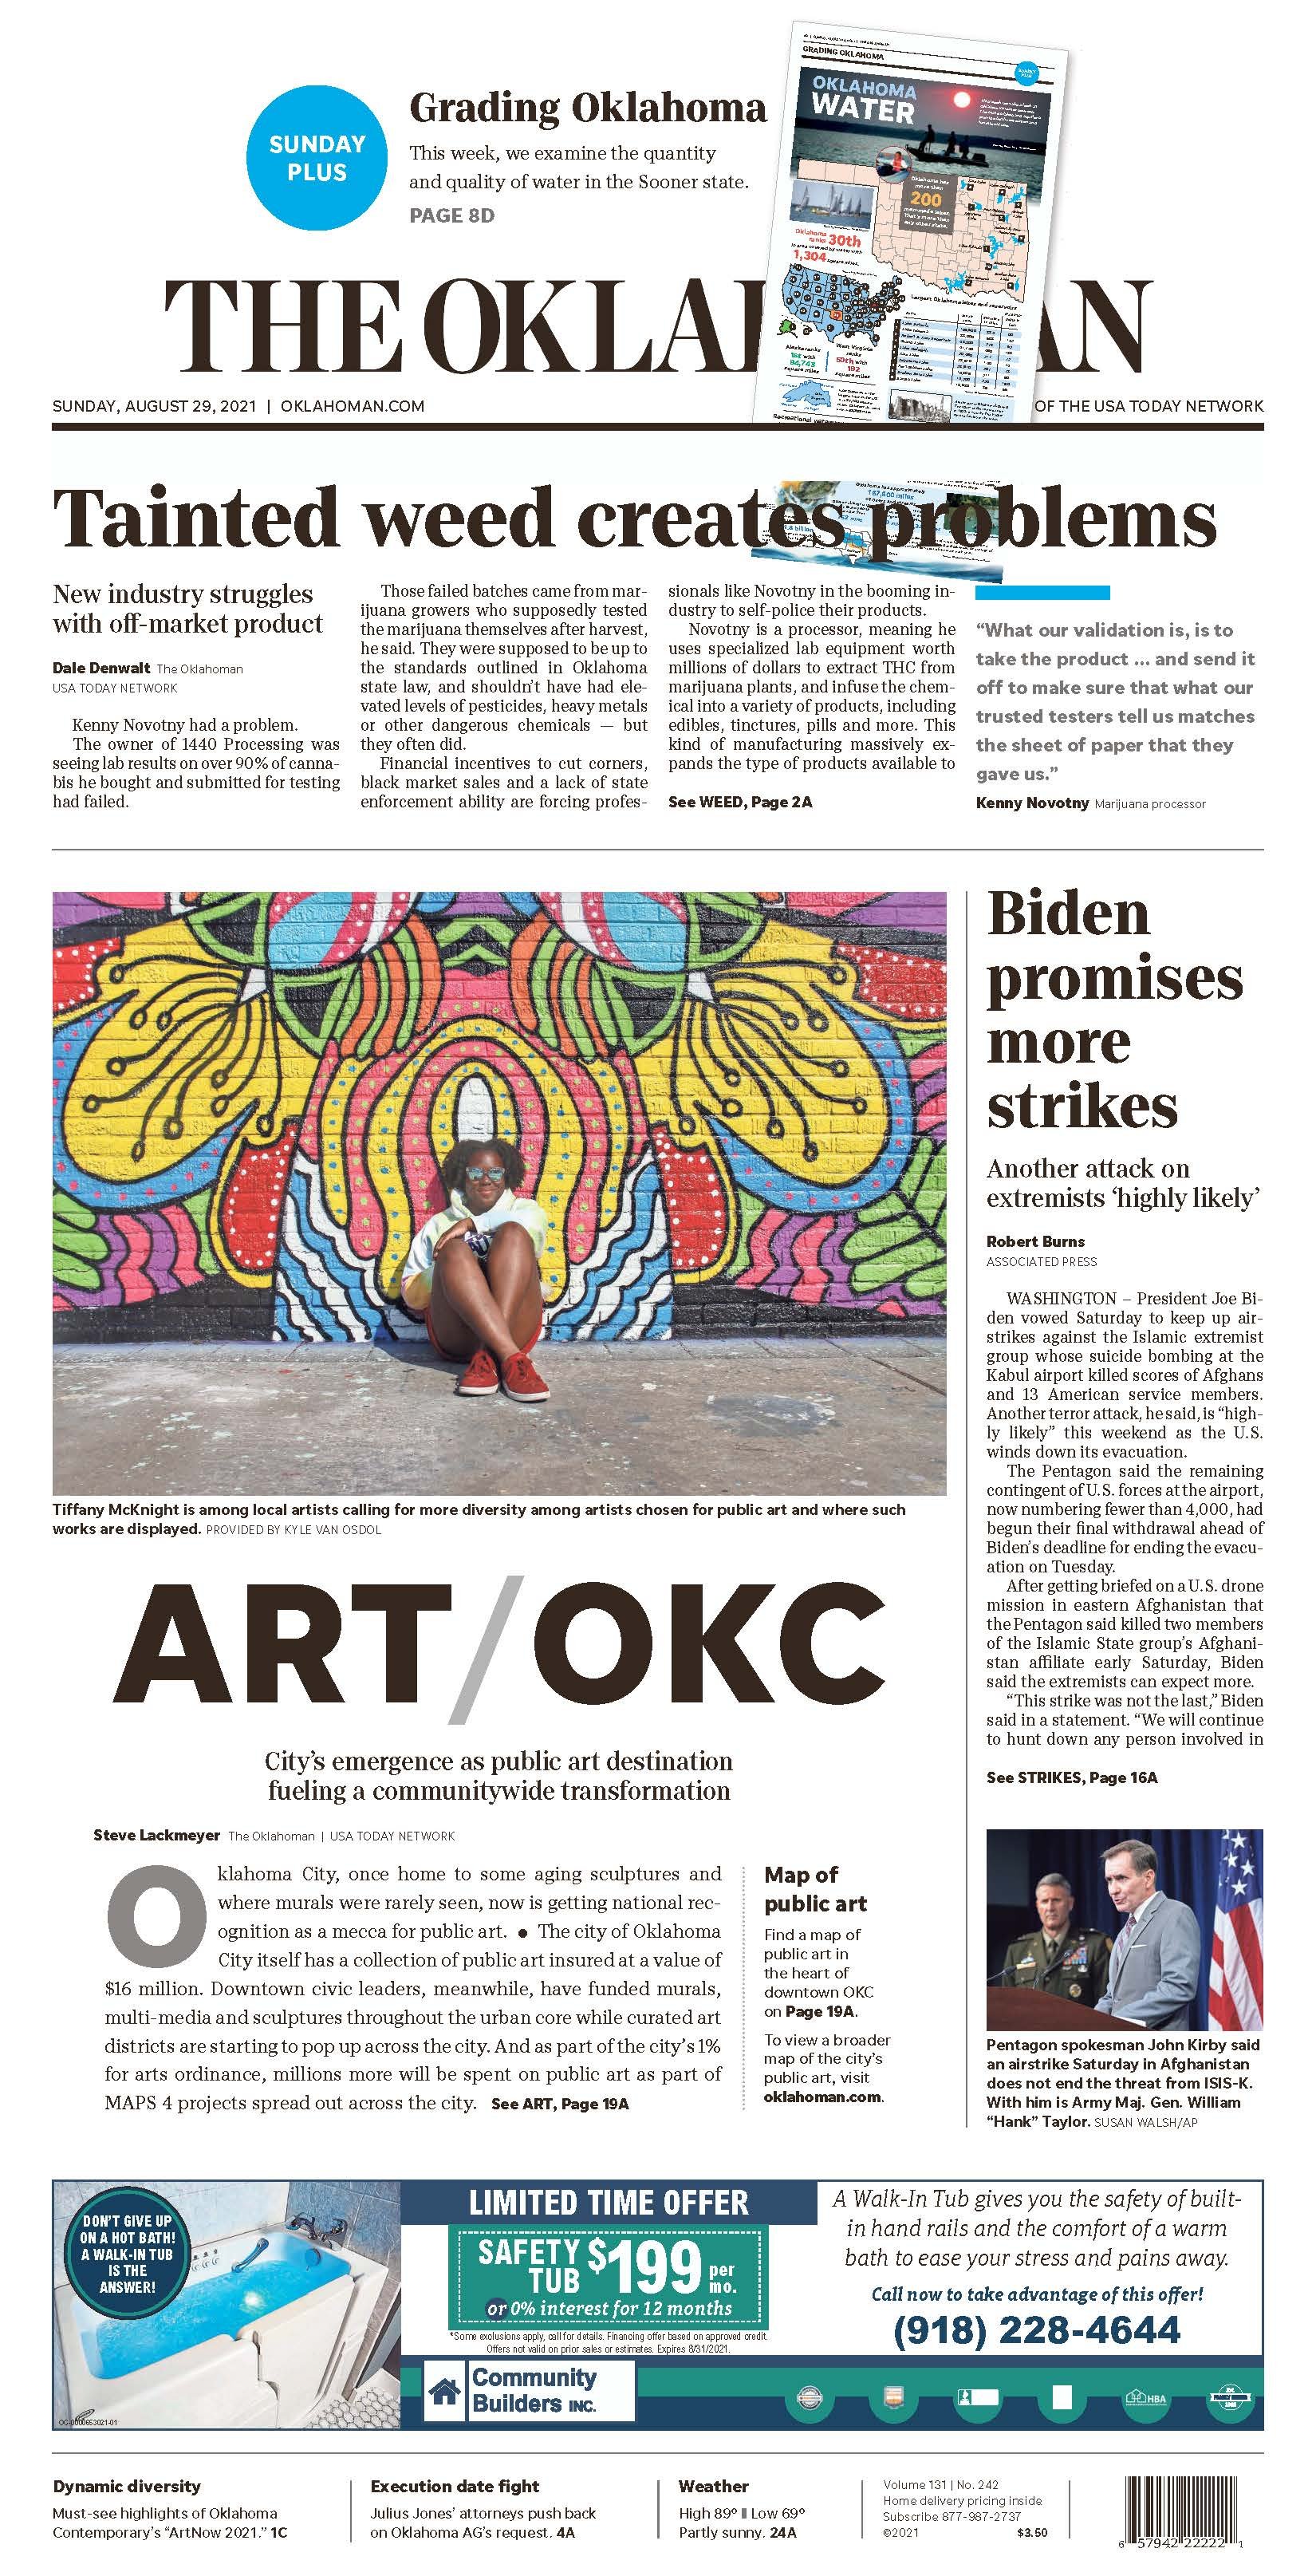 The Oklahoman - Page 1 and jumps - DOK_2021_08_29_Page_1.jpg